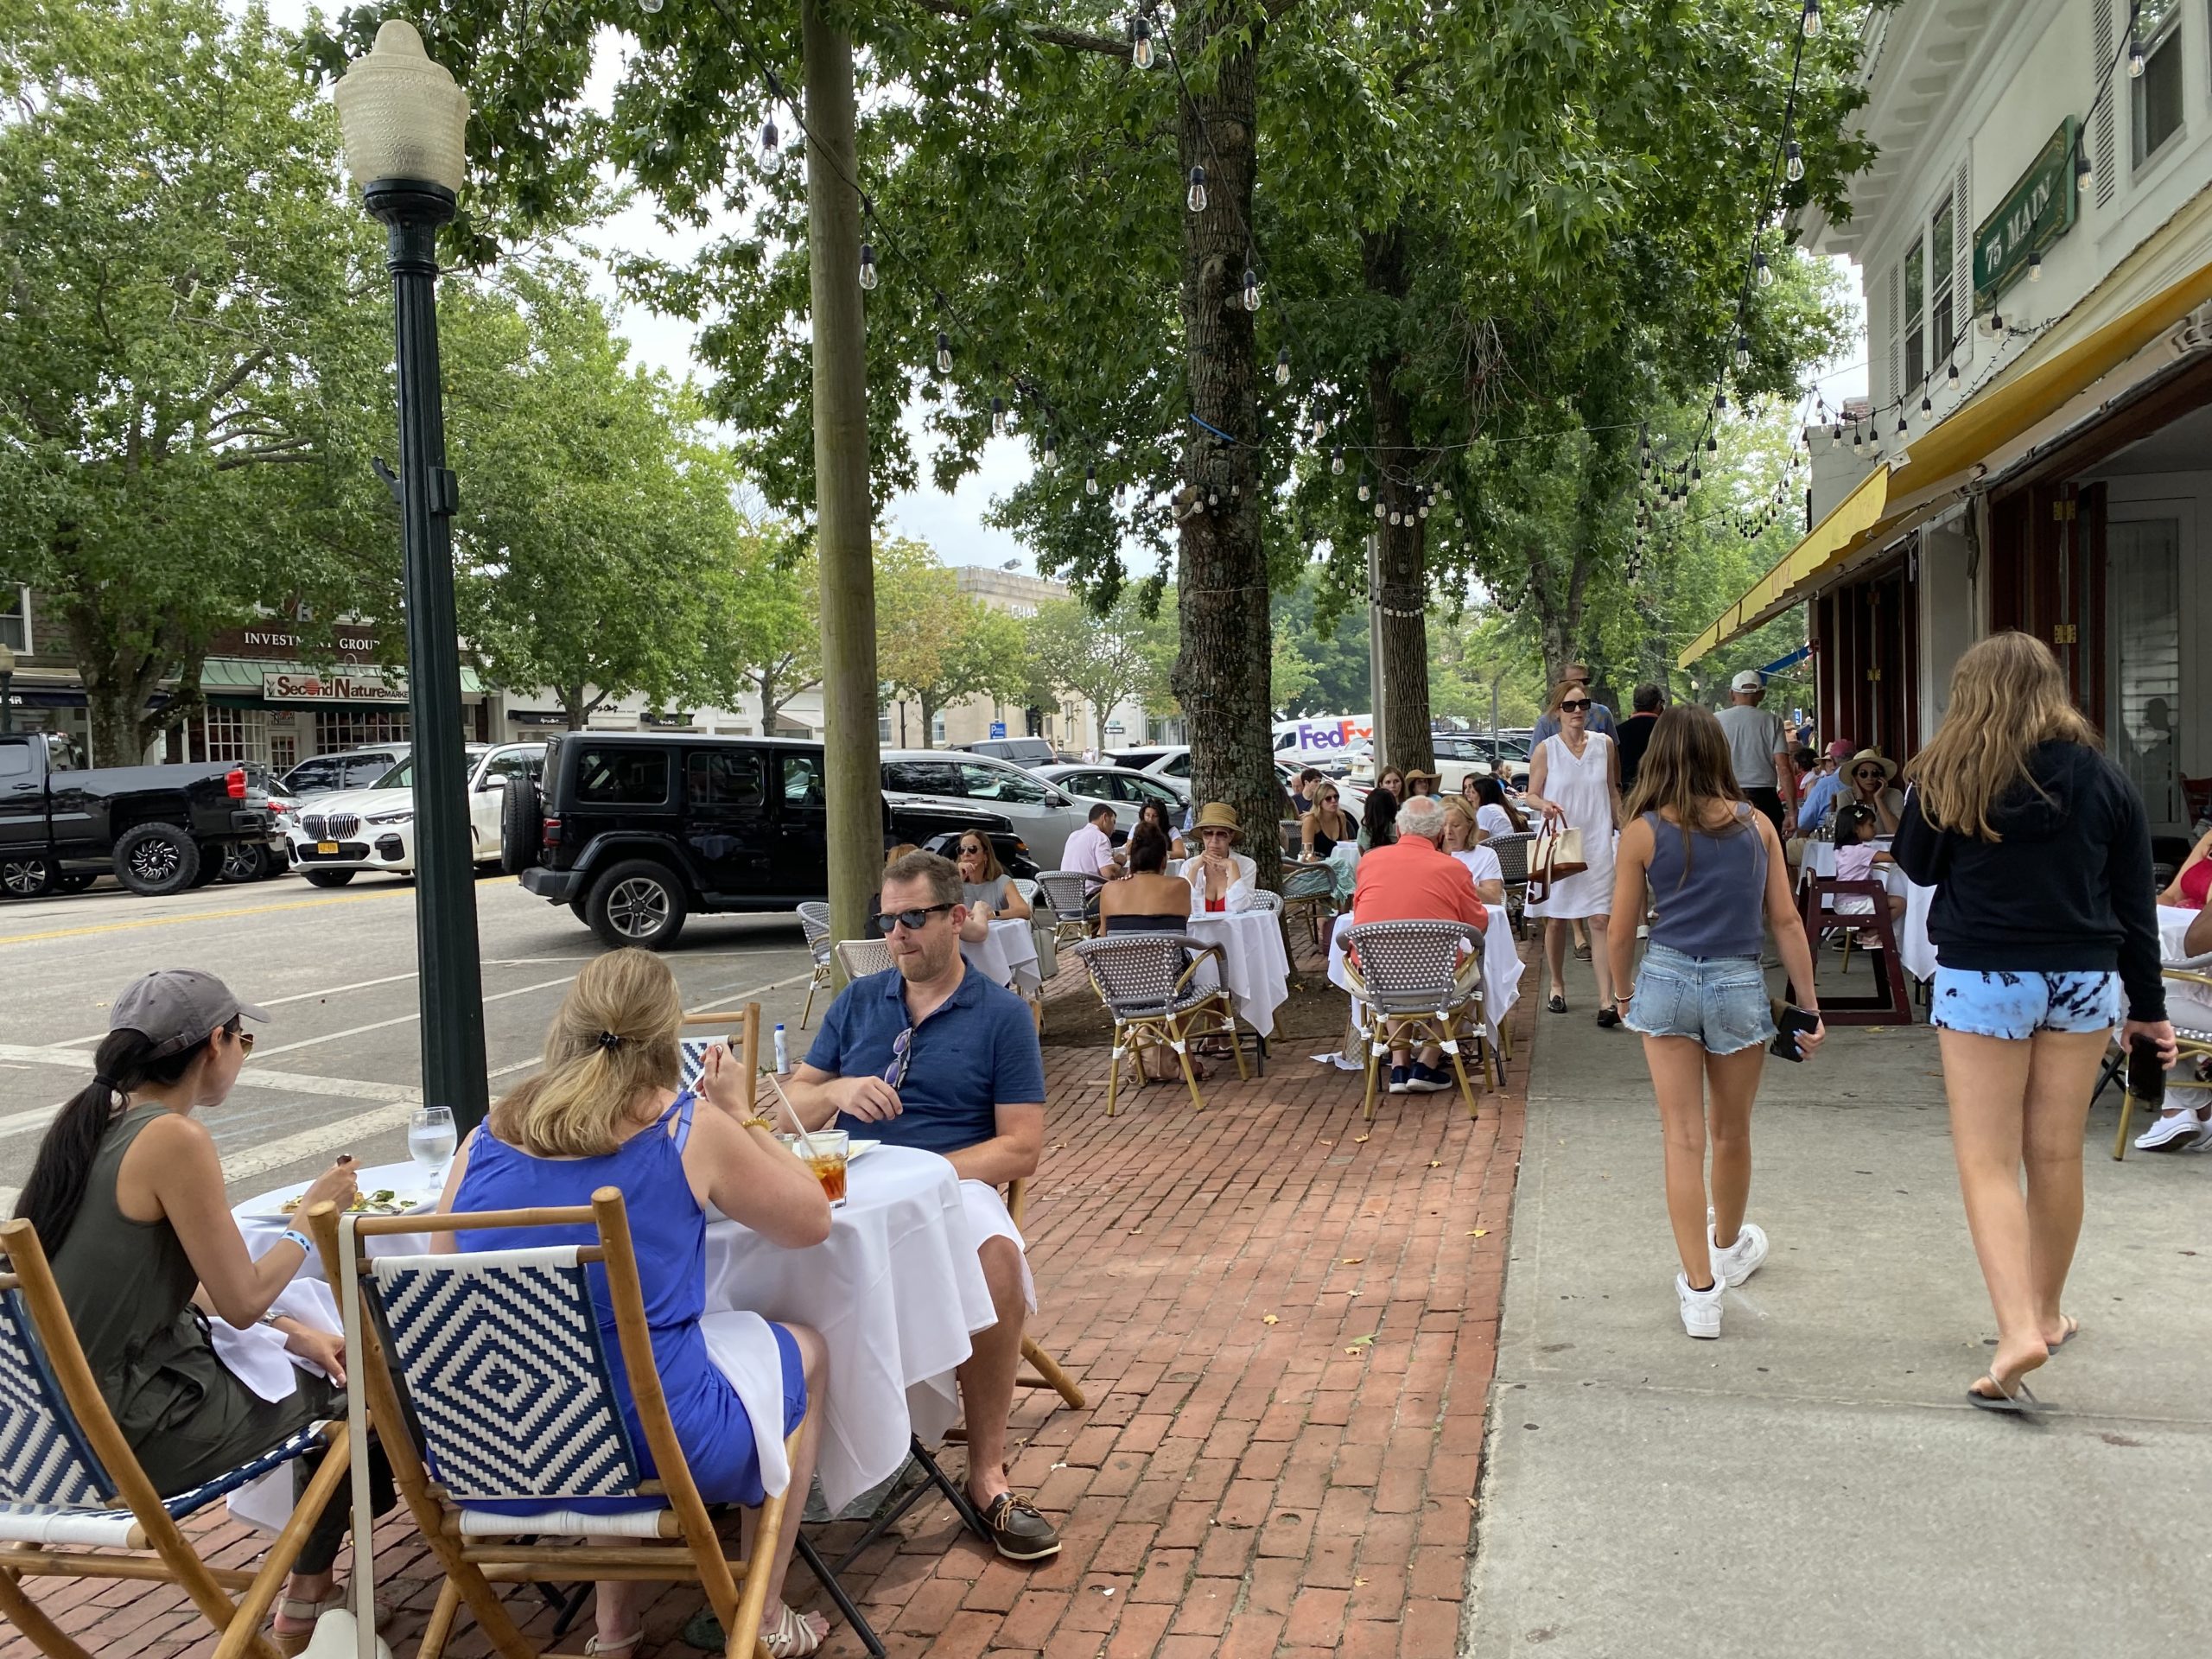 Outdoor dining helped restaurants make up for concerns about indoor dining but staffing shortages were the limiting factor across the region.